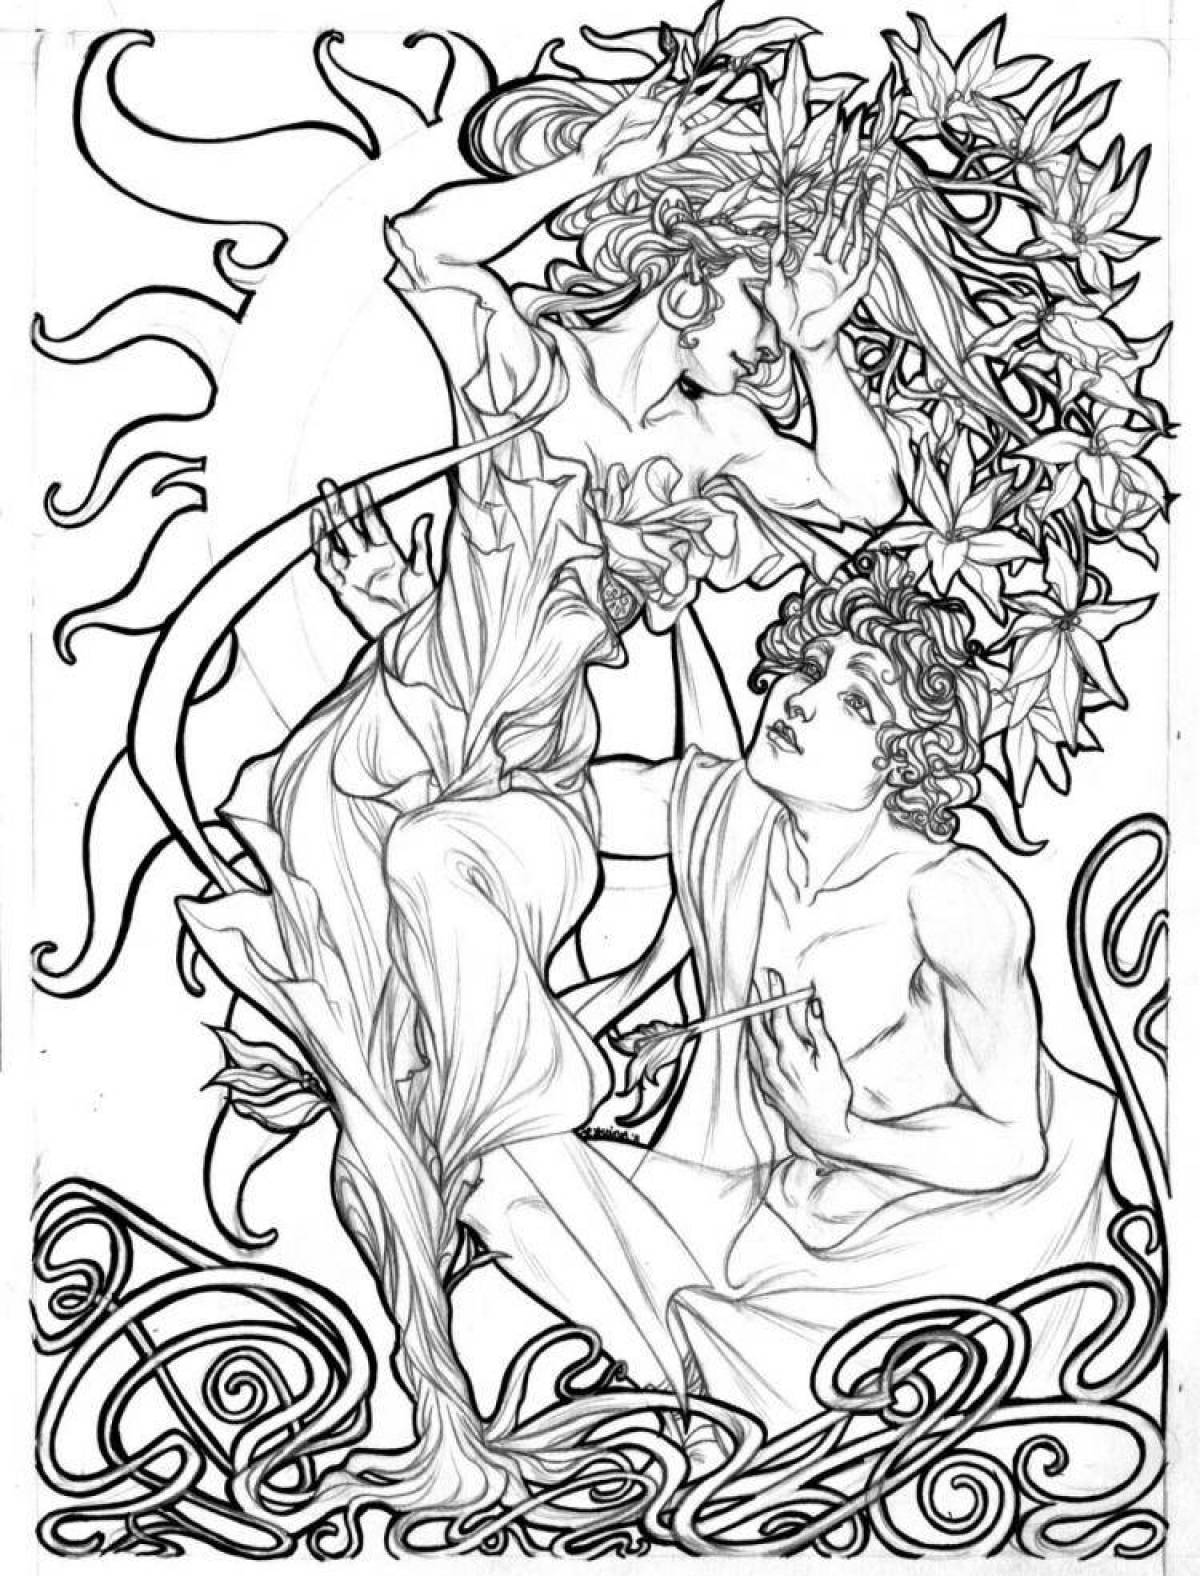 Coloring book charming Eurydice and Orpheus